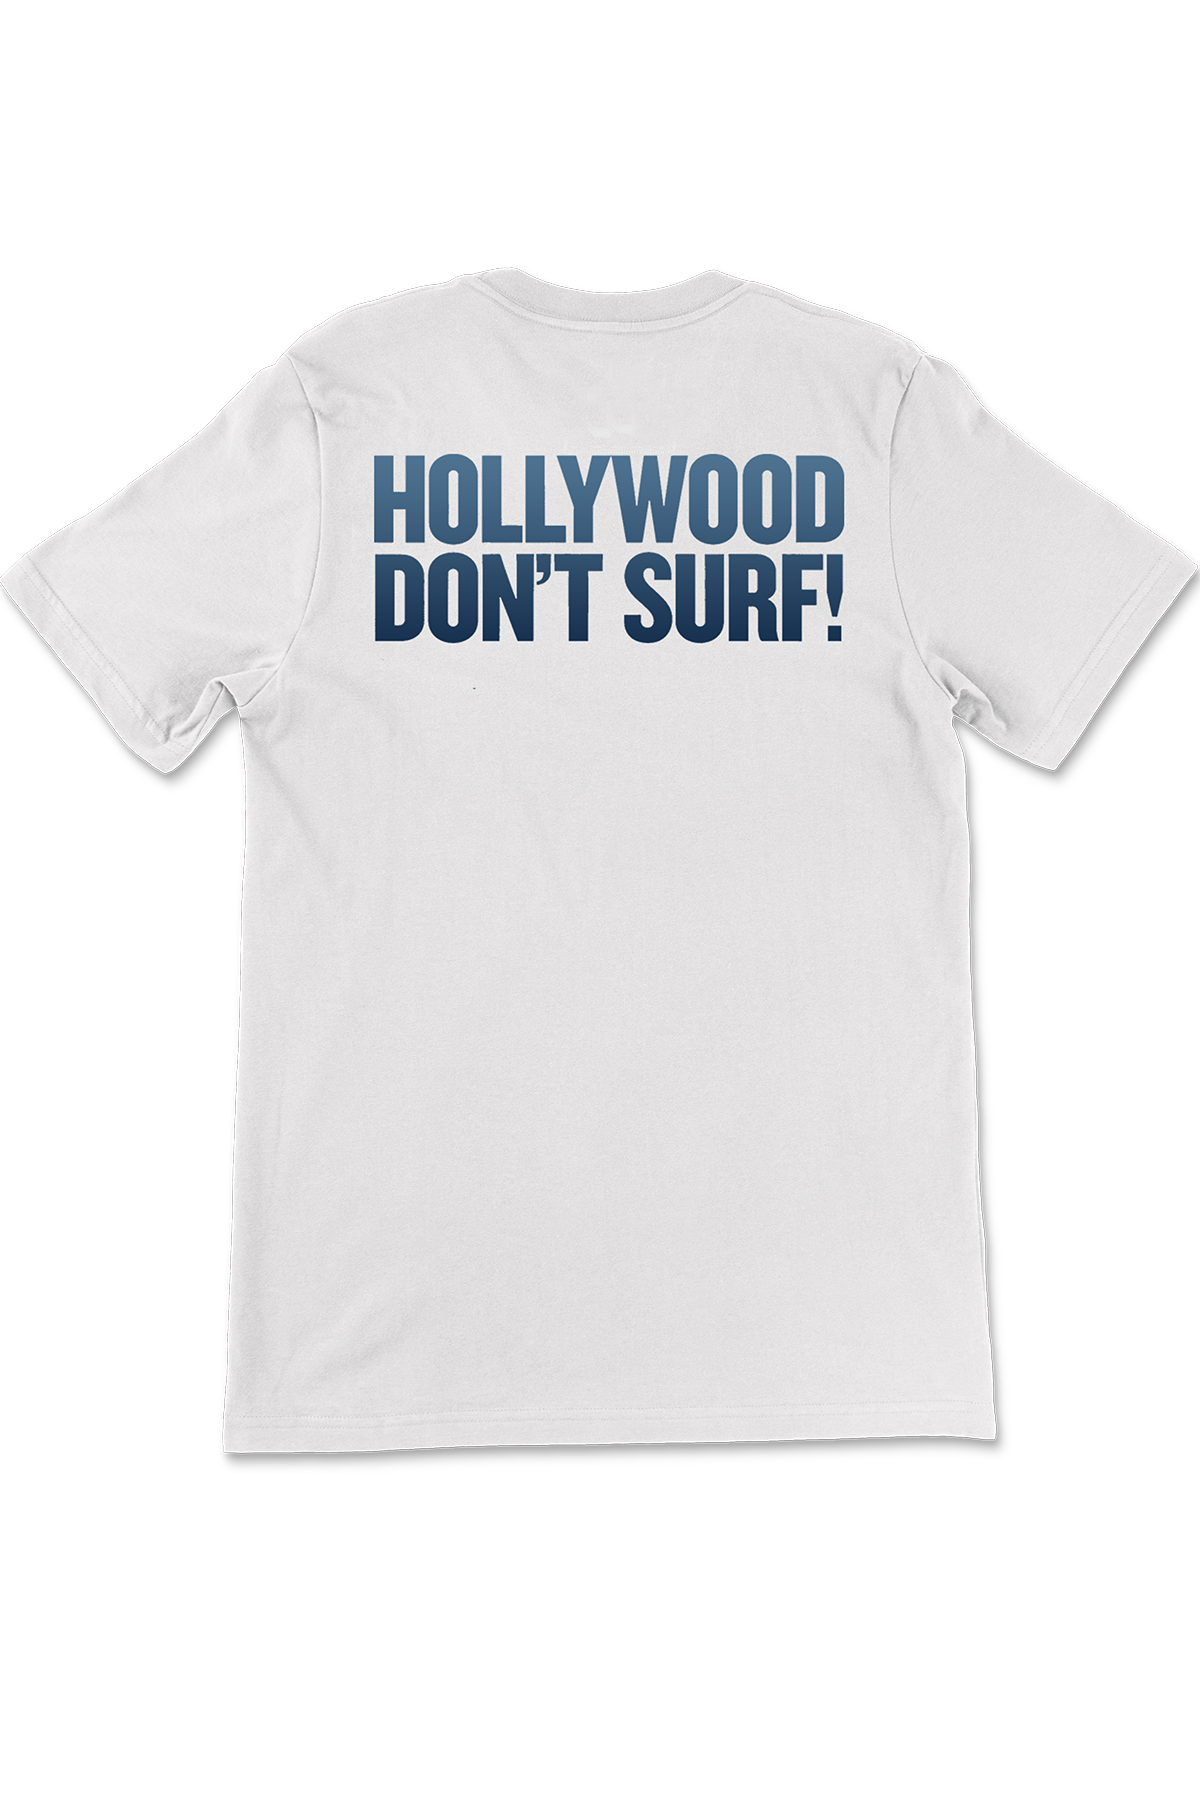 Hollywood Dont Surf! - Limited Edition Event Tee